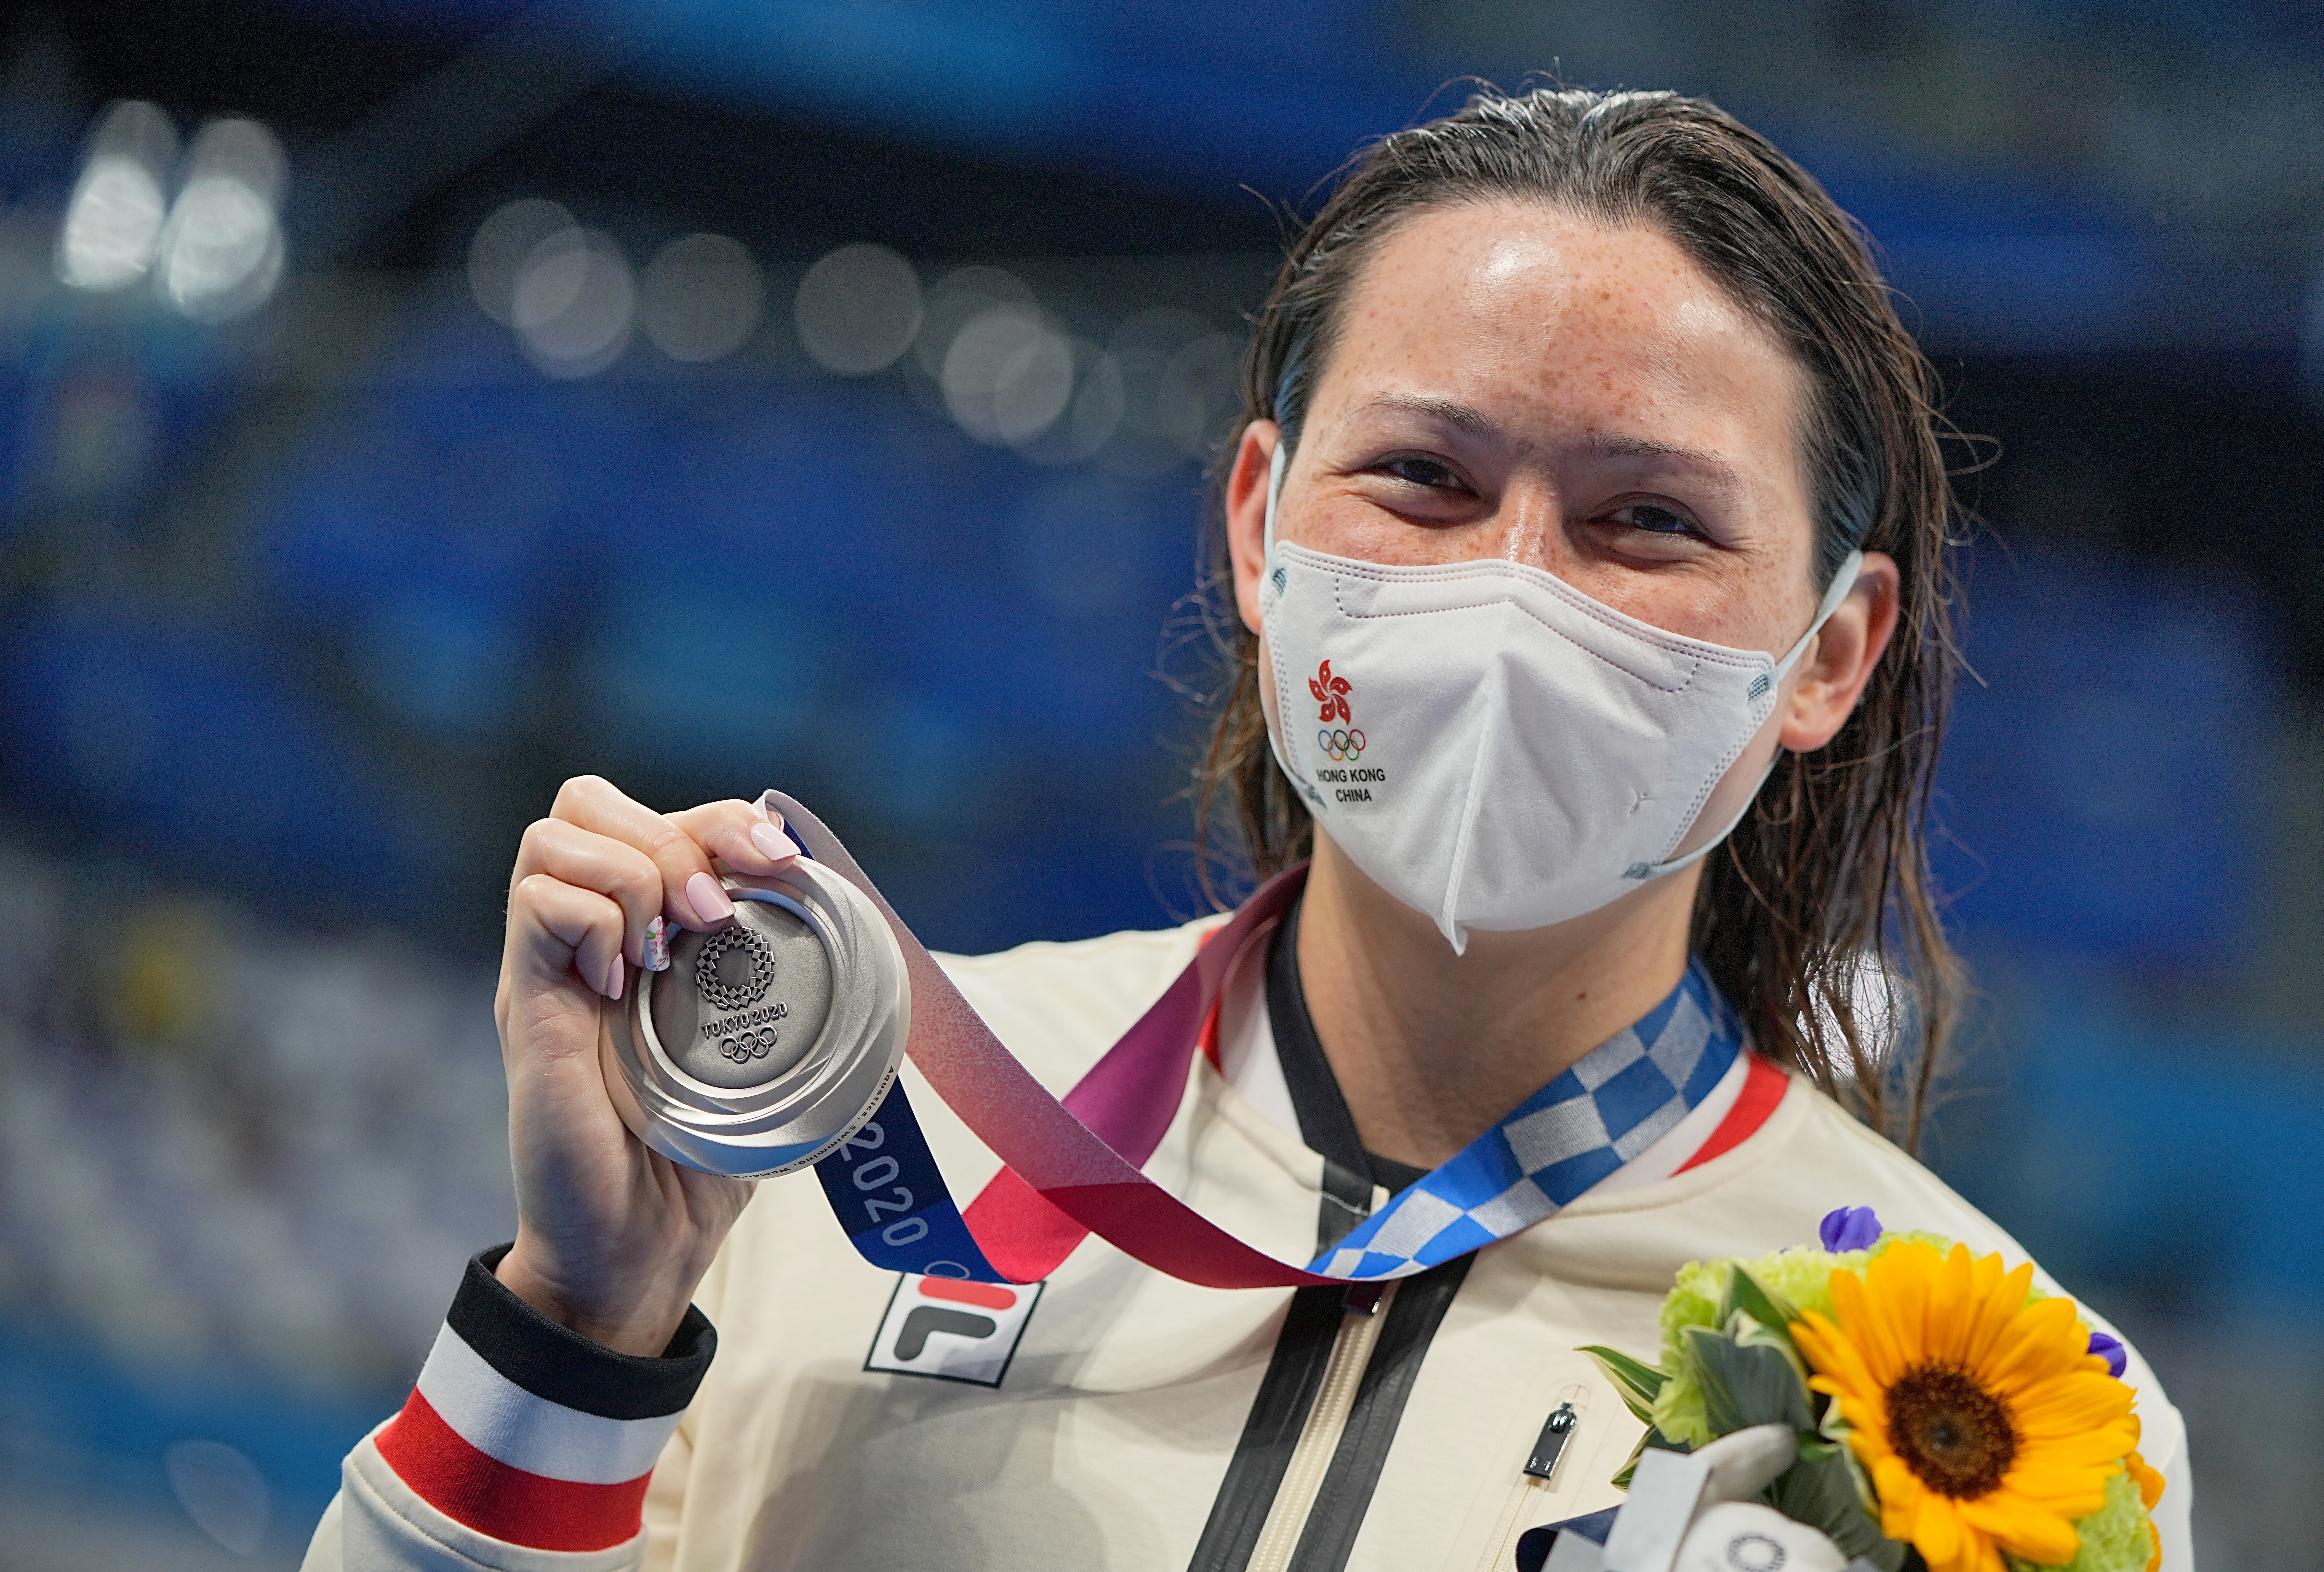 Siobhan Haughey holds up her silver medal at the awards ceremony after the Women's 200m Freestyle Final at the Tokyo 2020 Olympic Games. Photo: DPA